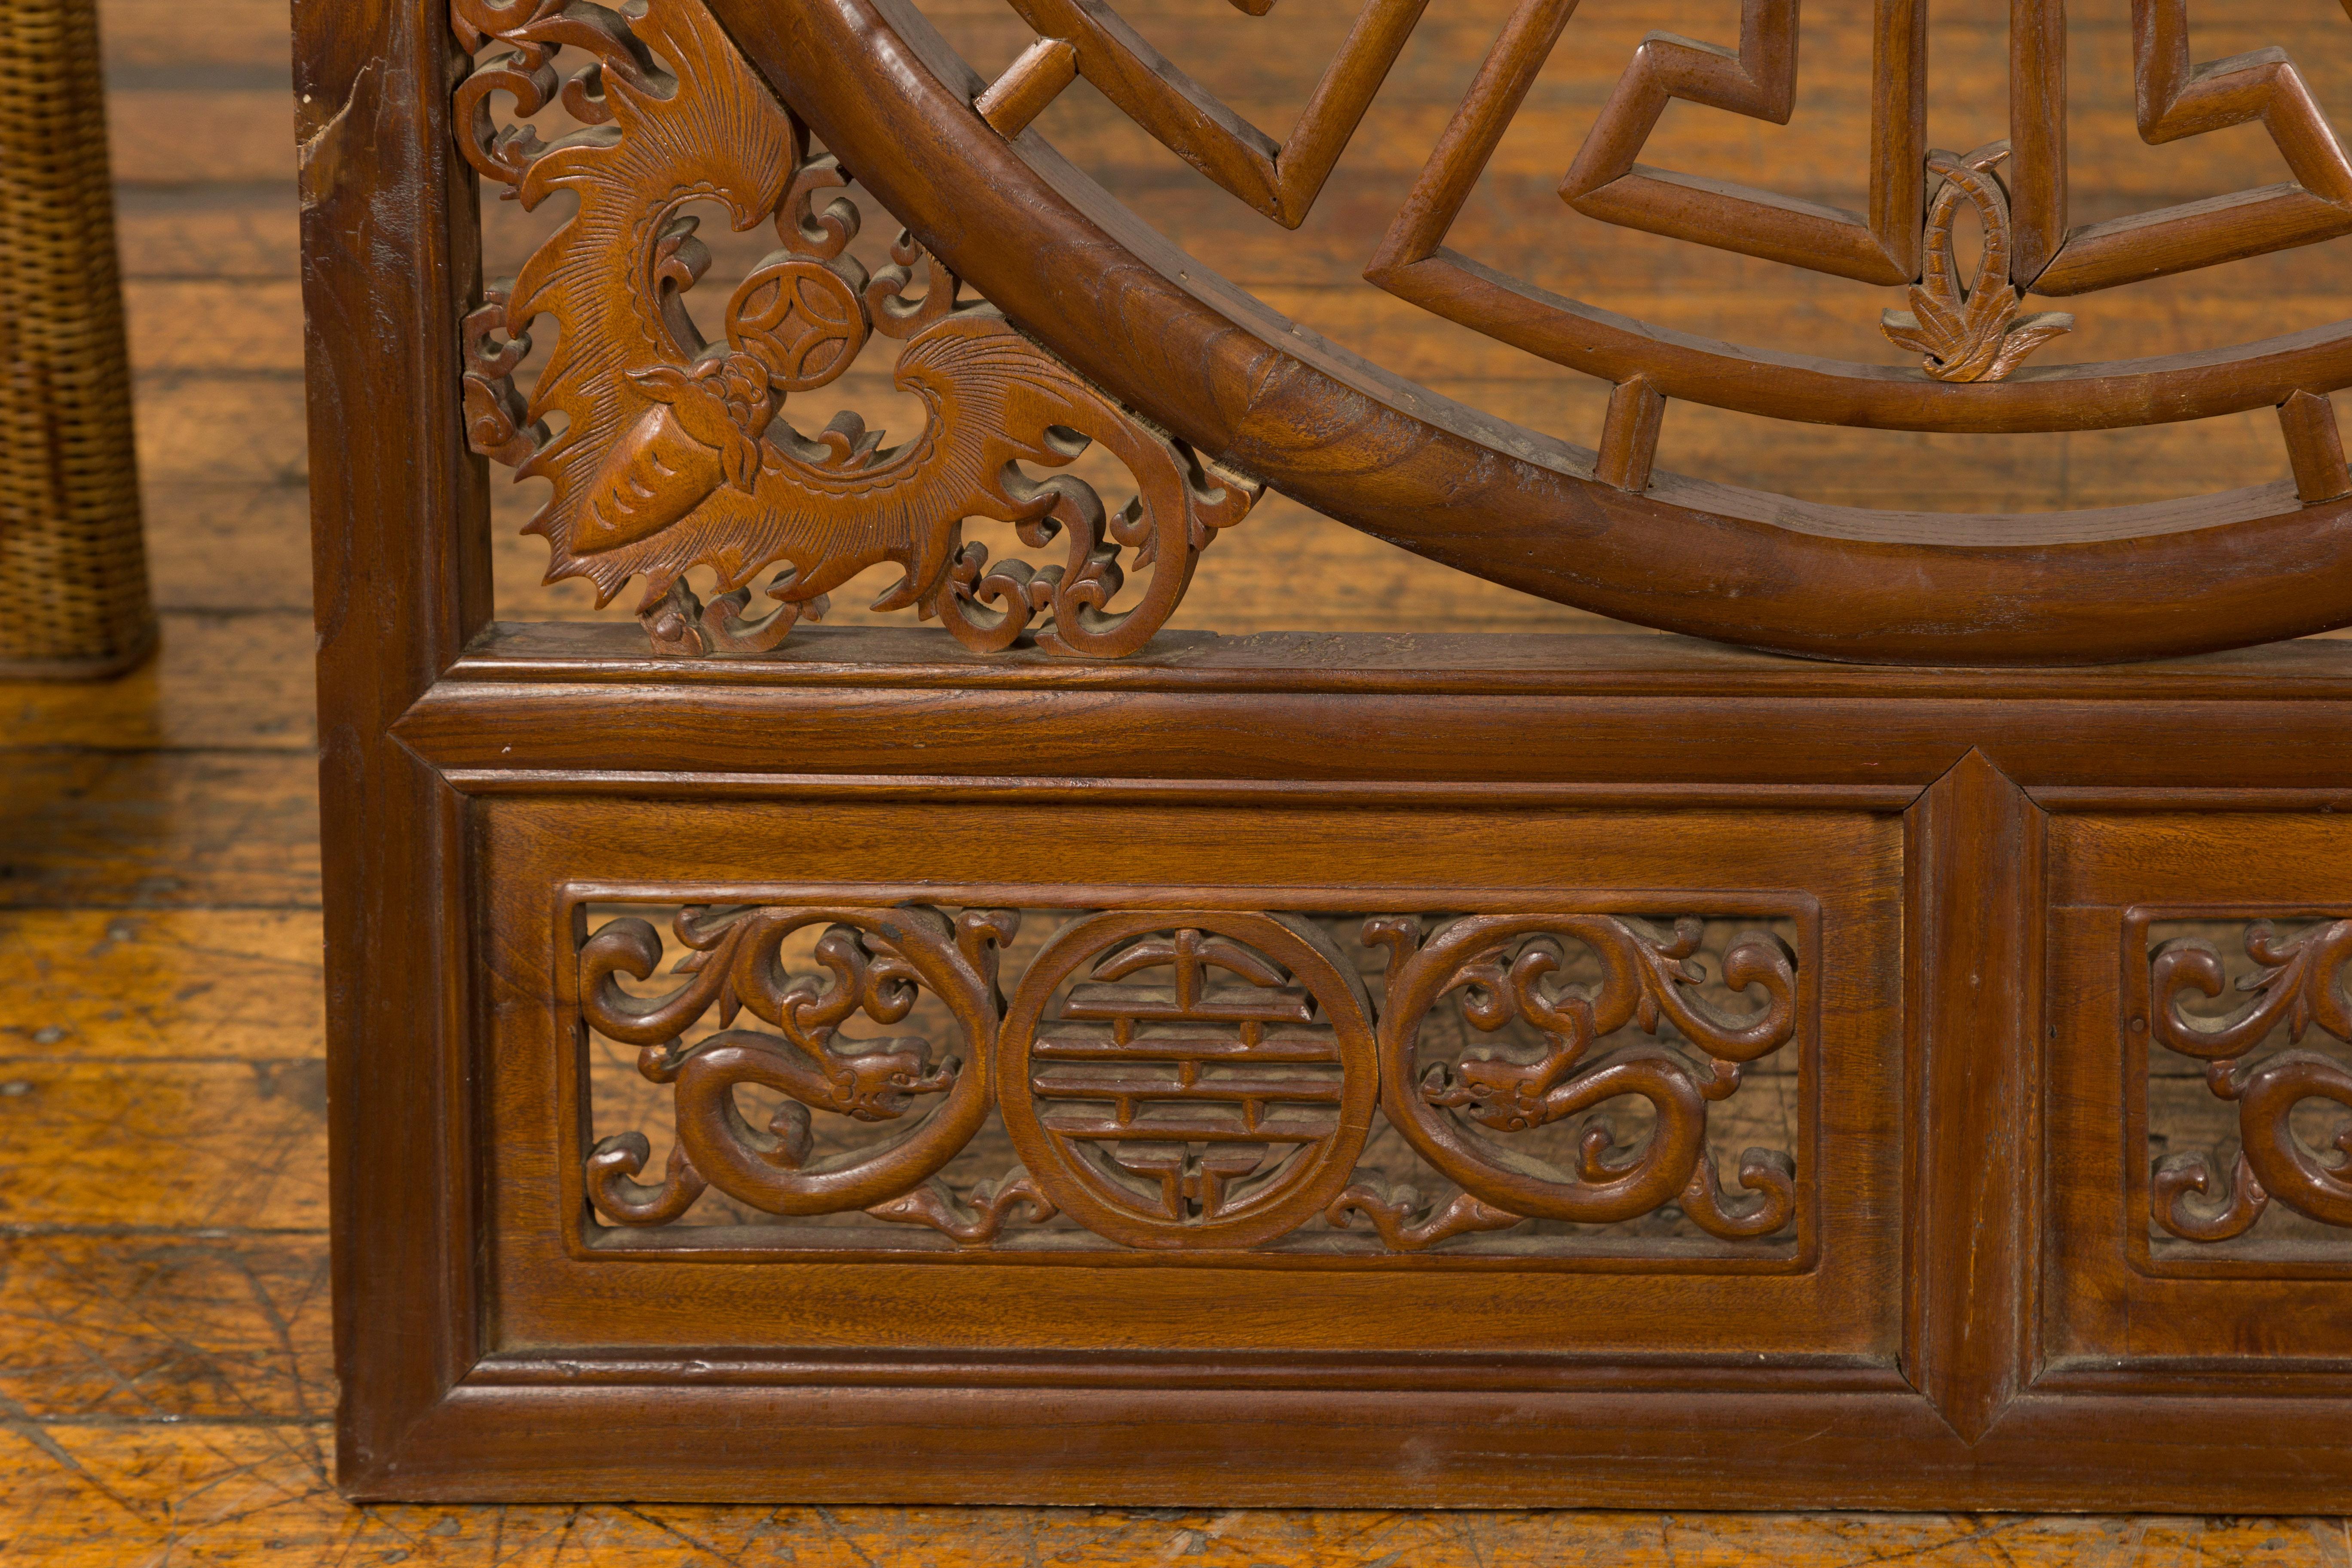 Chinese Late Qing Dynasty Fretwork Panel with Phoenix, Bats and Geometric Maze For Sale 1